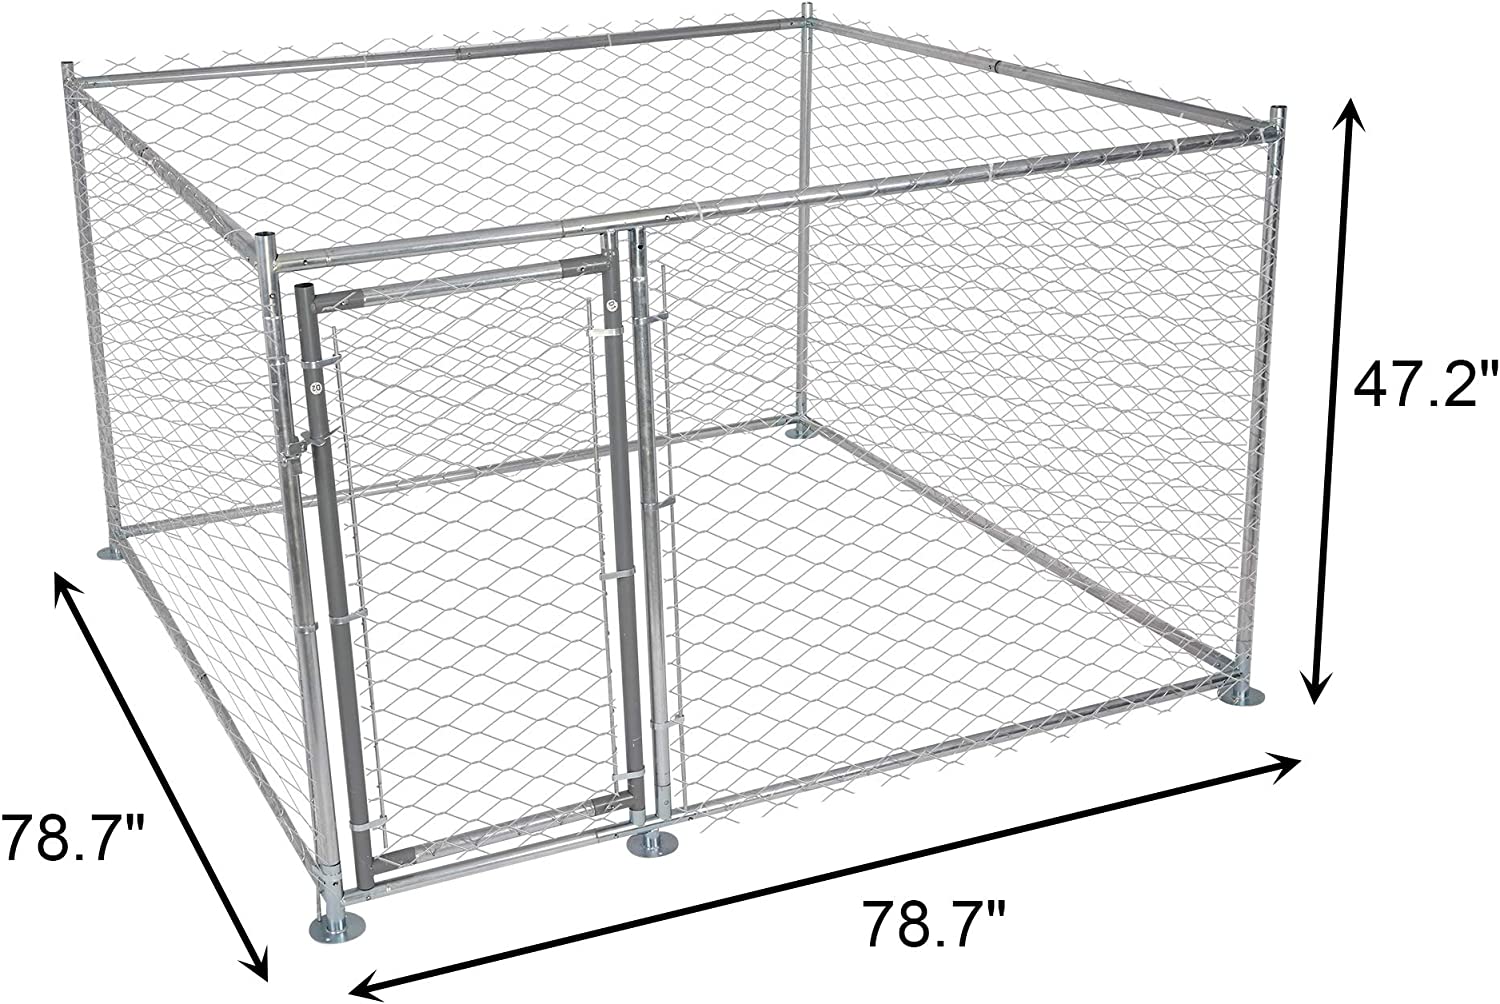 6.5'x6.5'x4' Outdoor Dog Kennel Galvanized Steel Pet Playpen with Secure Lock for Large Dog